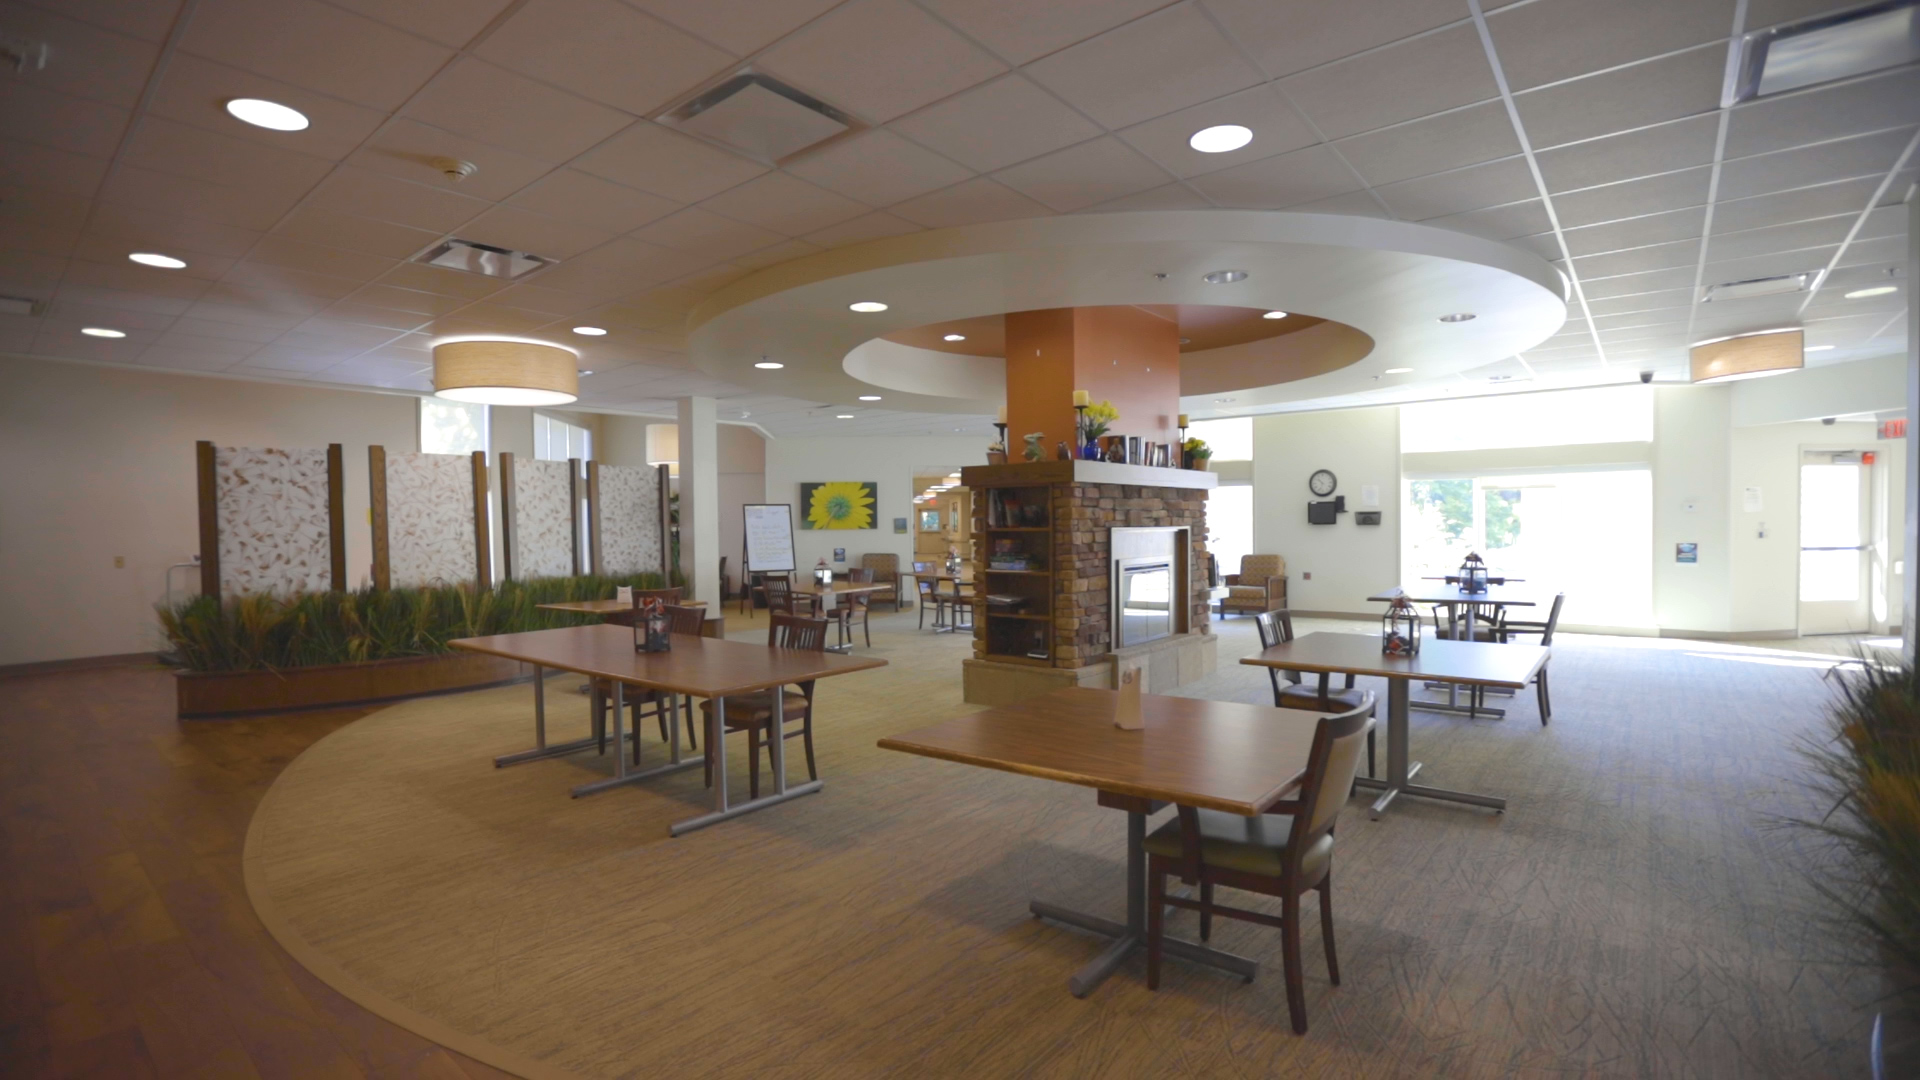 Dining hall with dining tables and chairs.